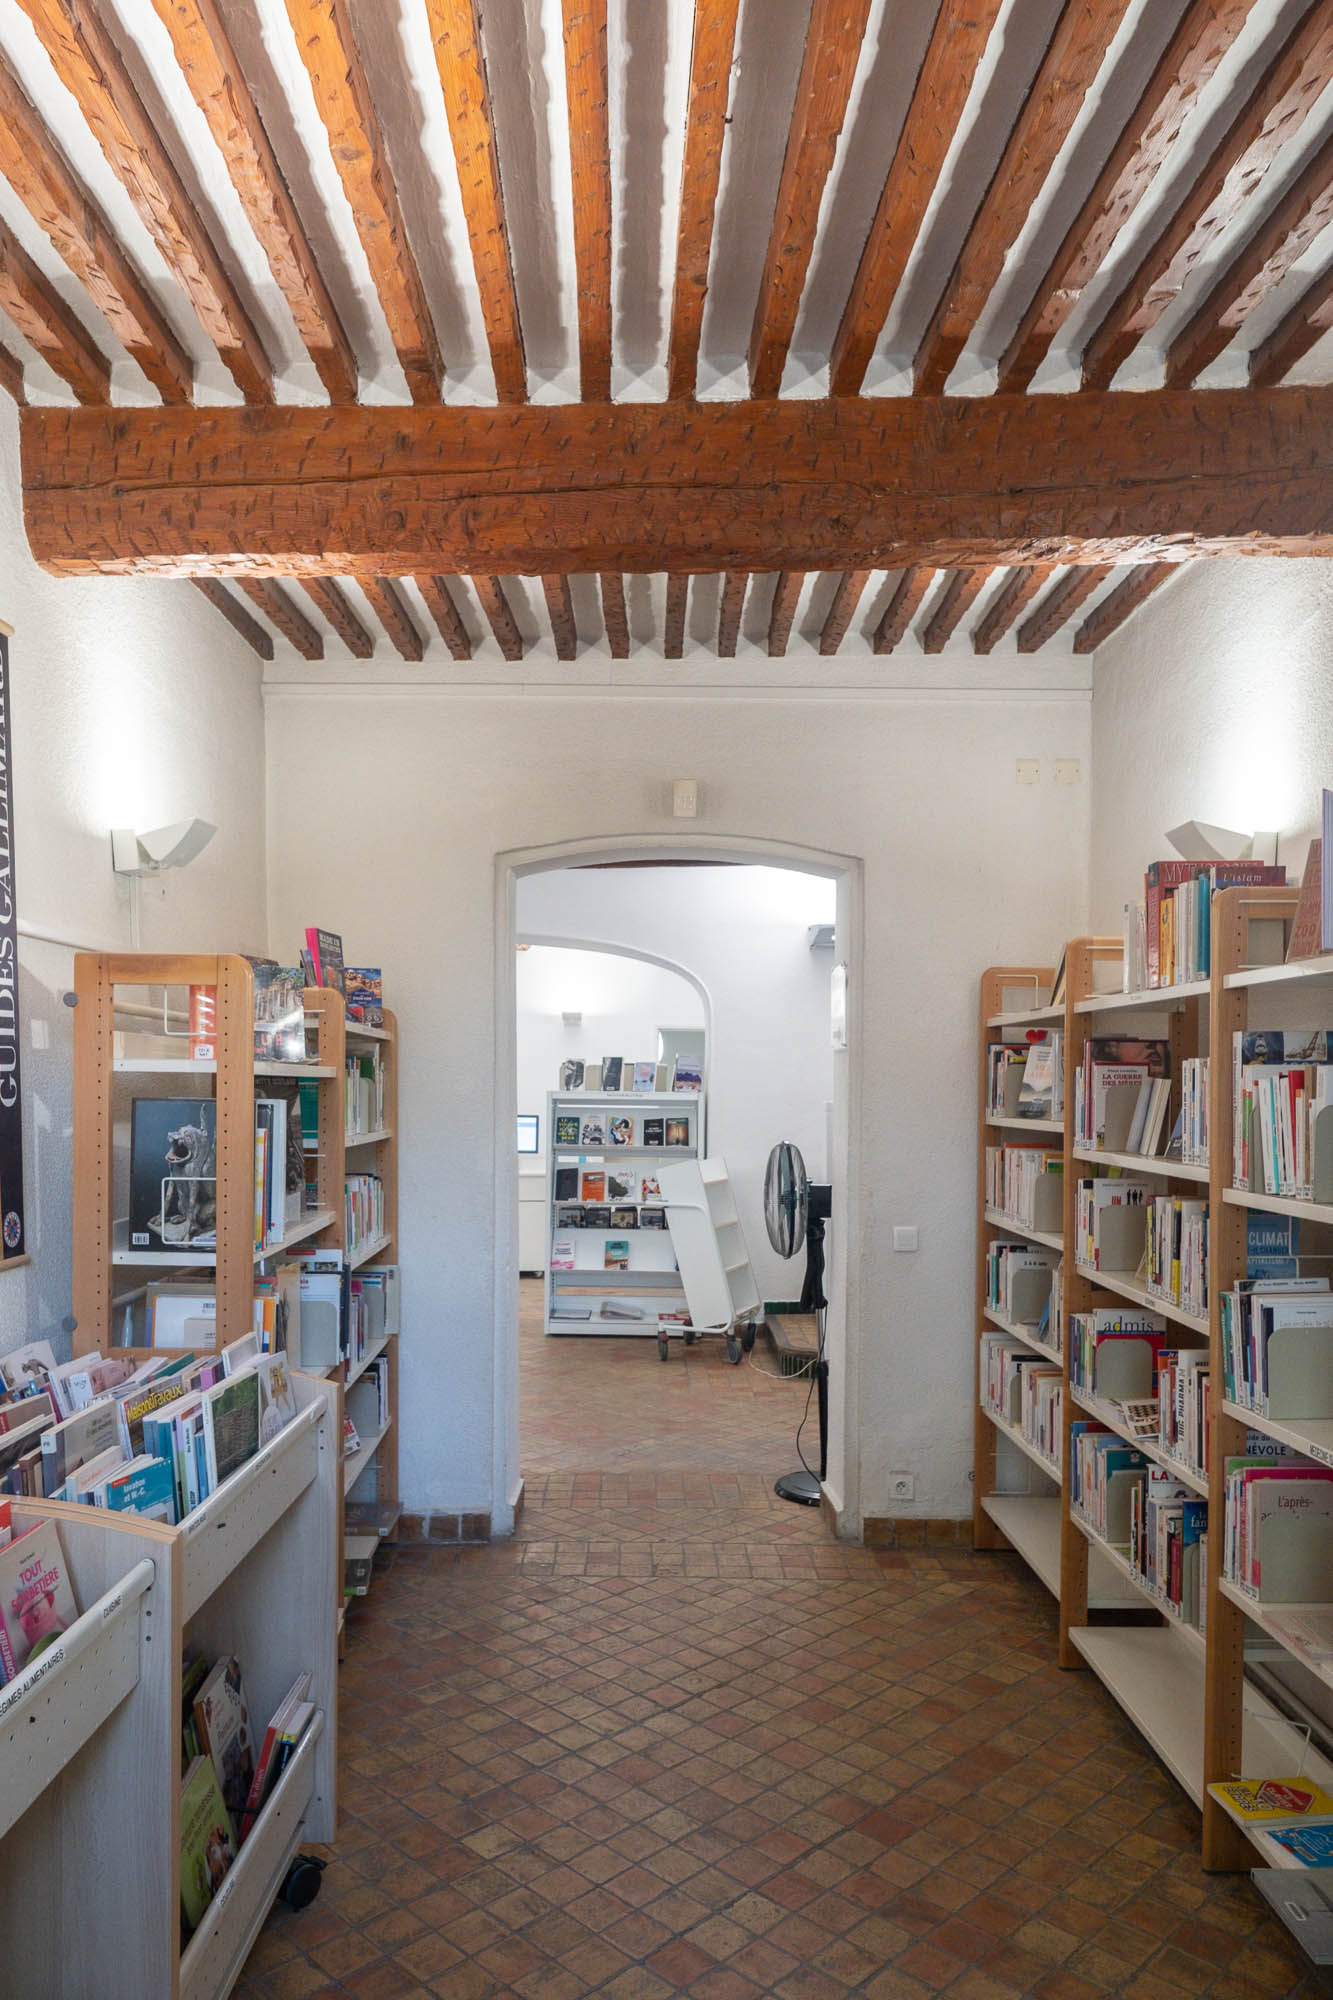 Interior of an old bastide house transformed into a library with wooden beams showing on the ceiling, arched doorways and modern wooden shelves along the walls.